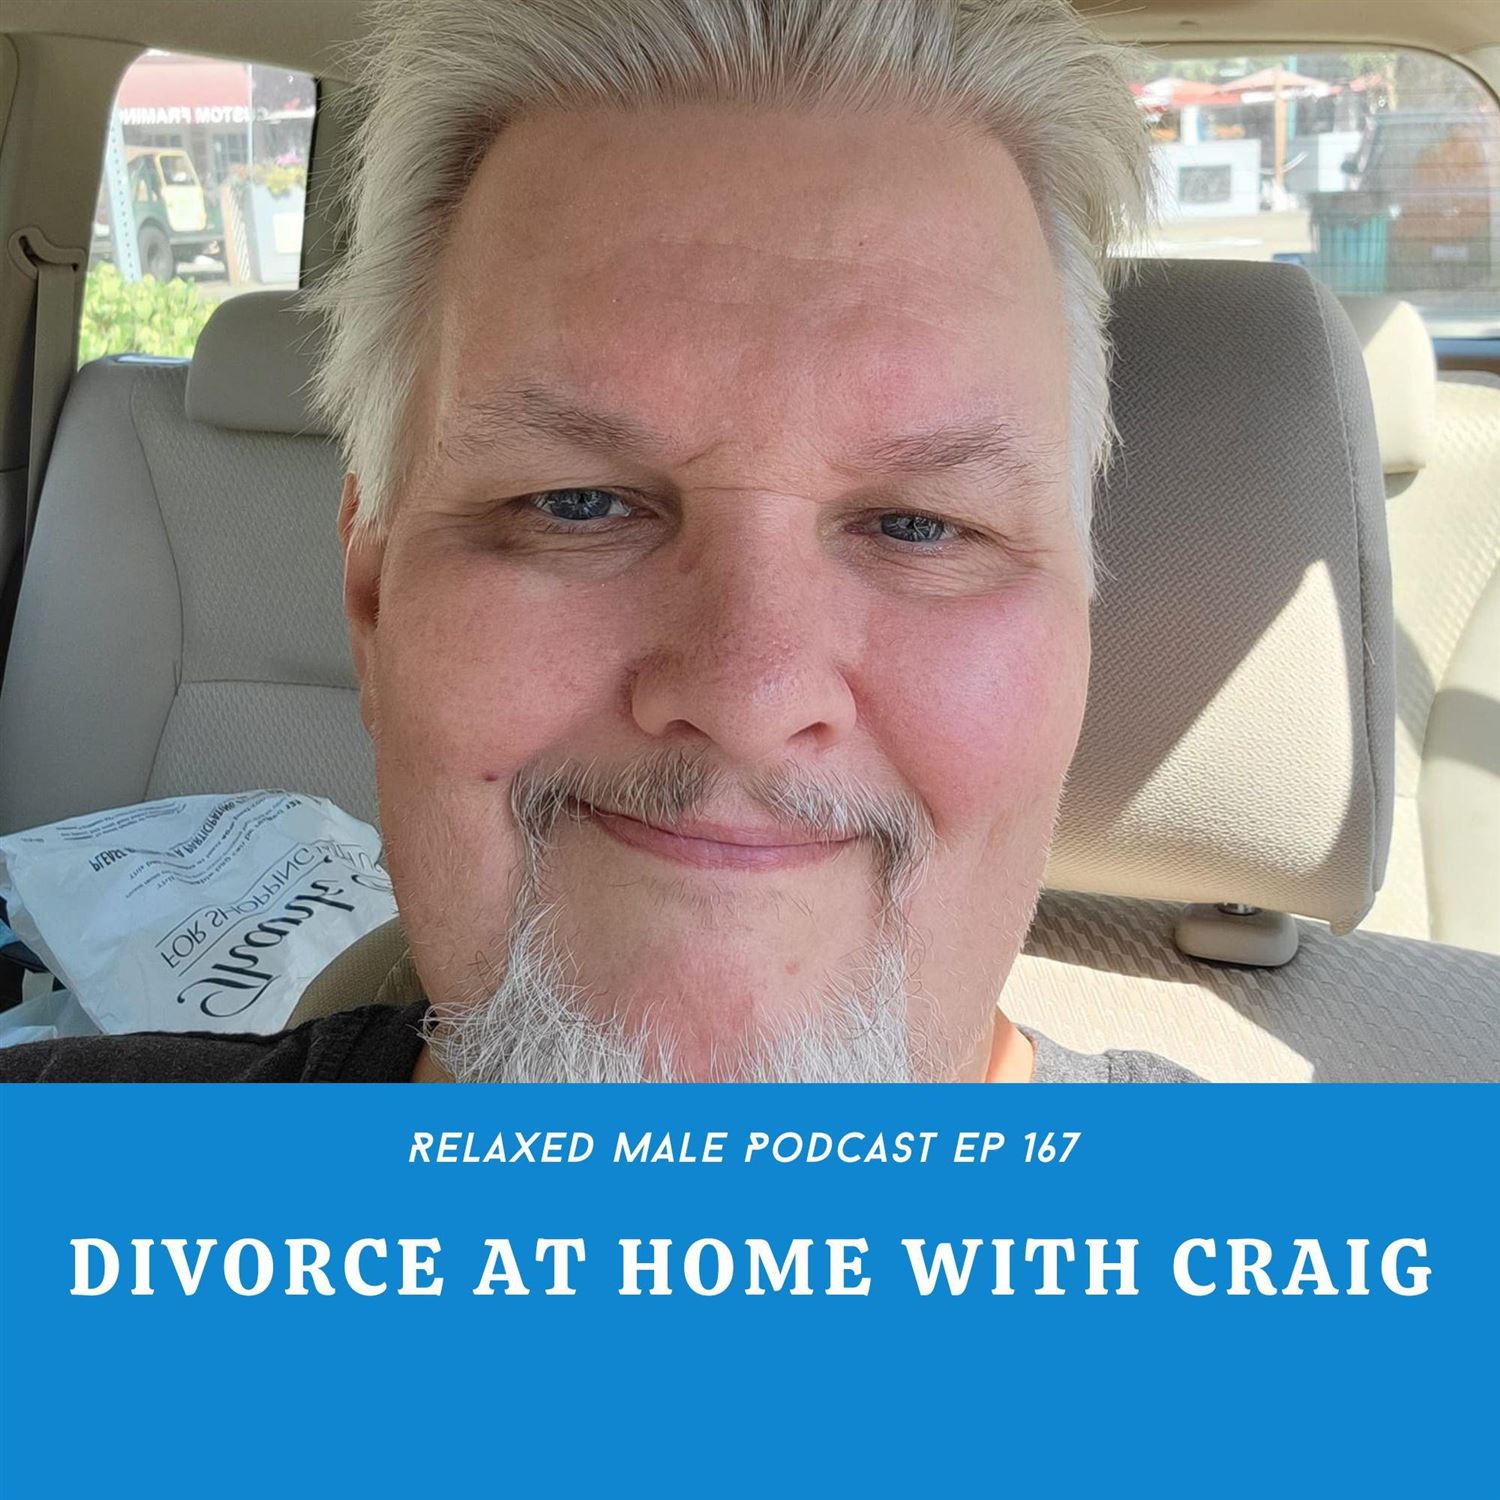 Divorced at Home With Craig